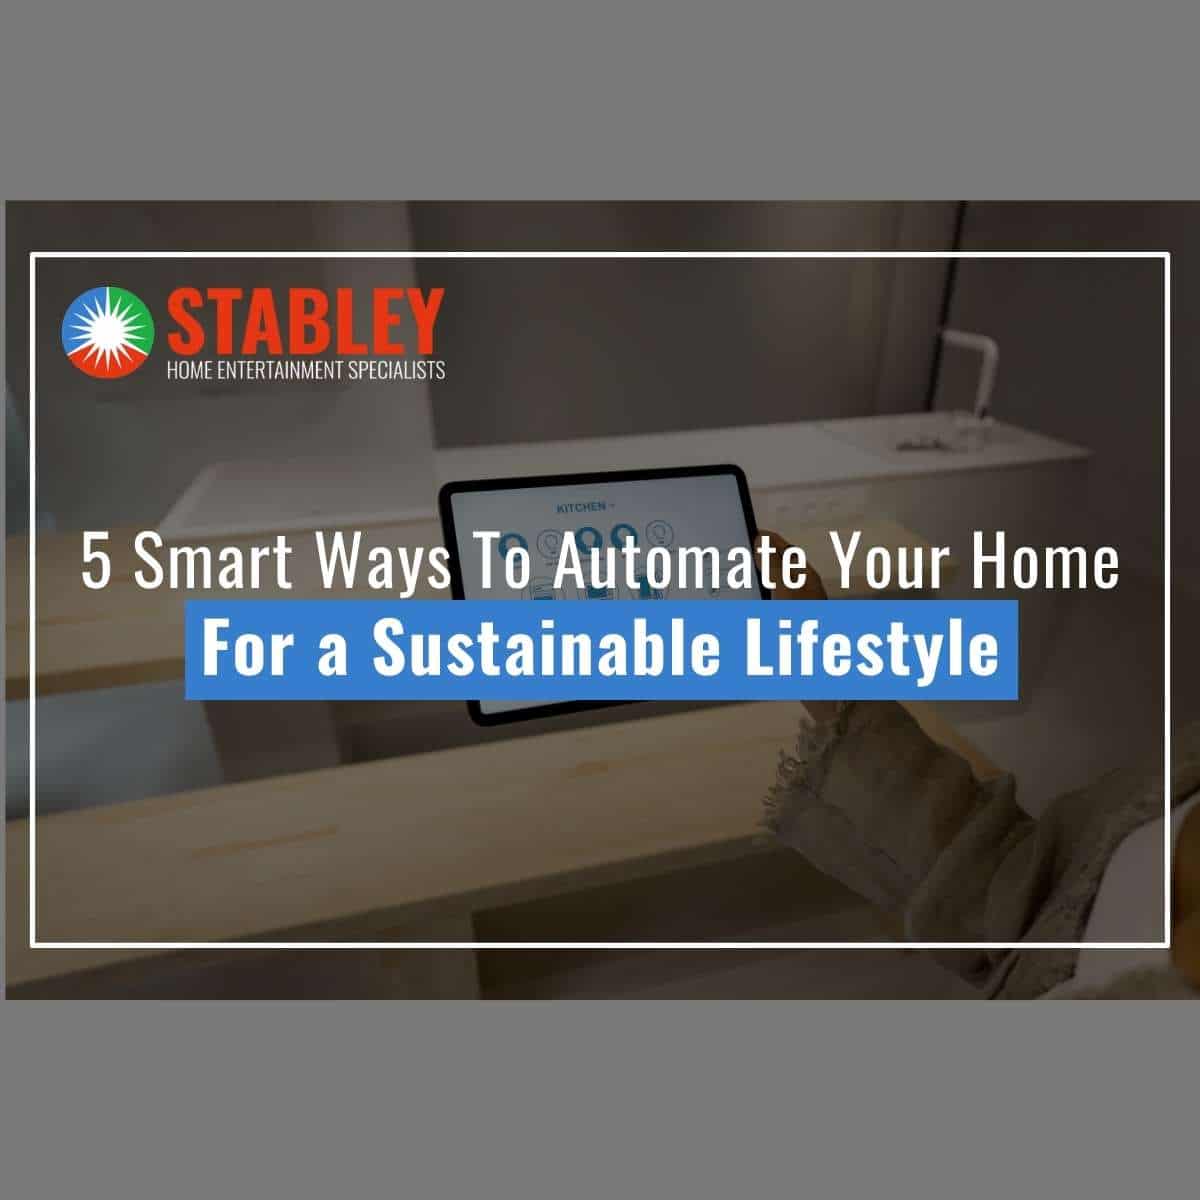 5 Smart Ways To Automate Your Home For a Sustainable Lifestyle